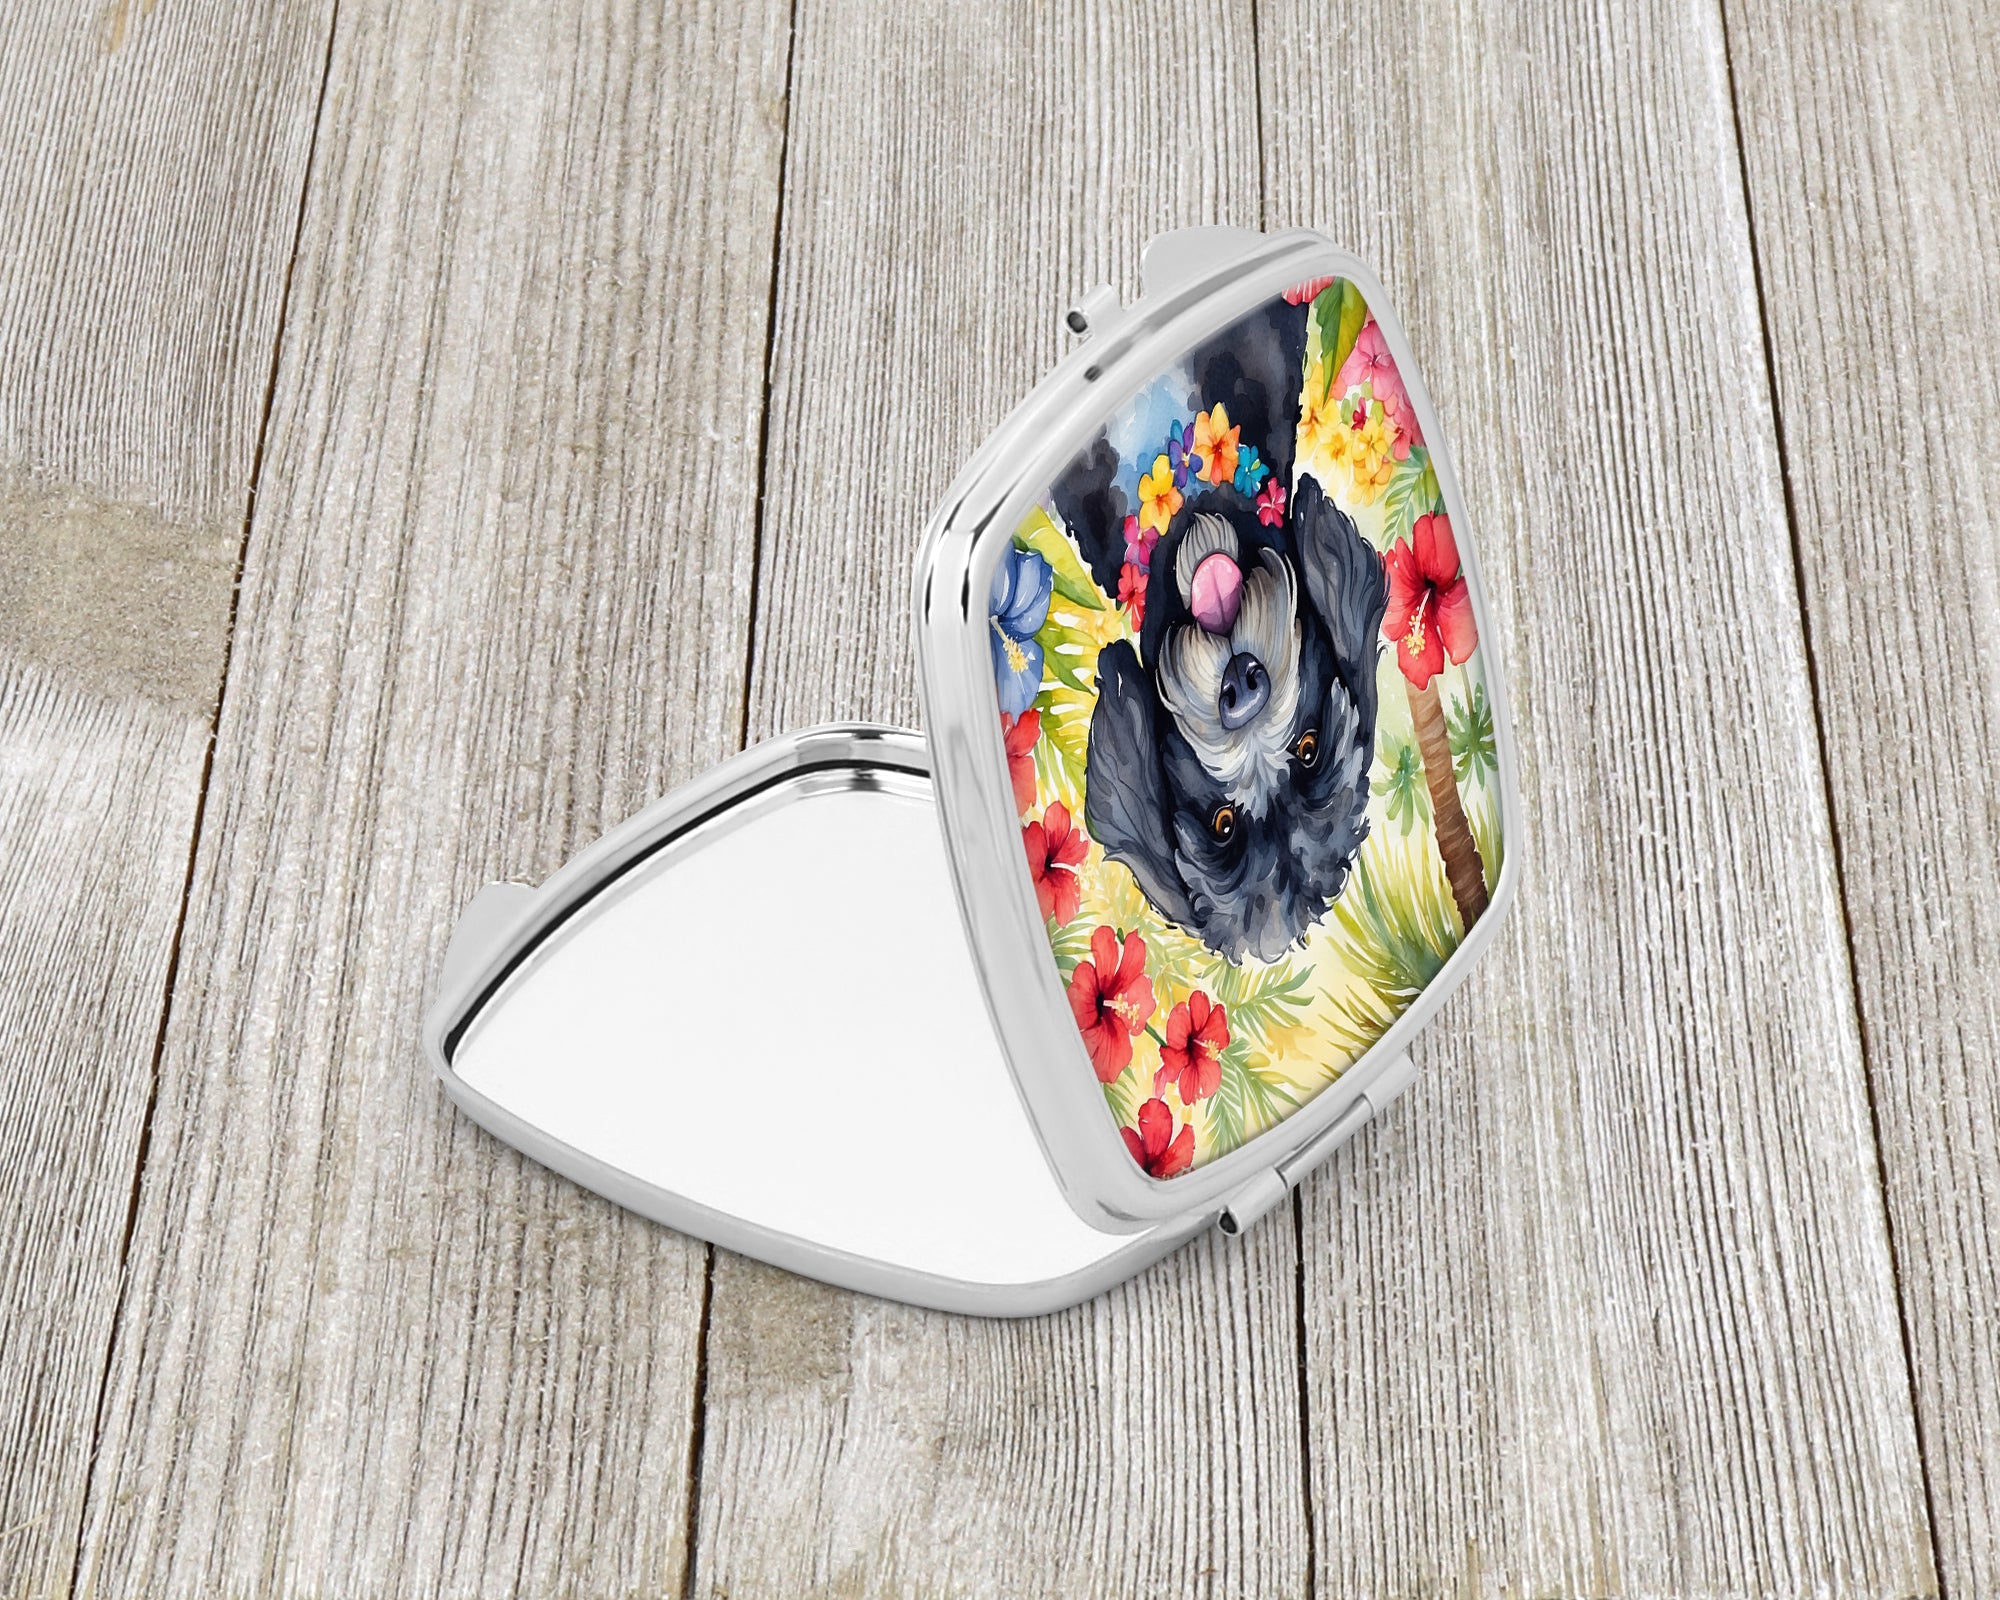 Buy this Portuguese Water Dog Luau Compact Mirror